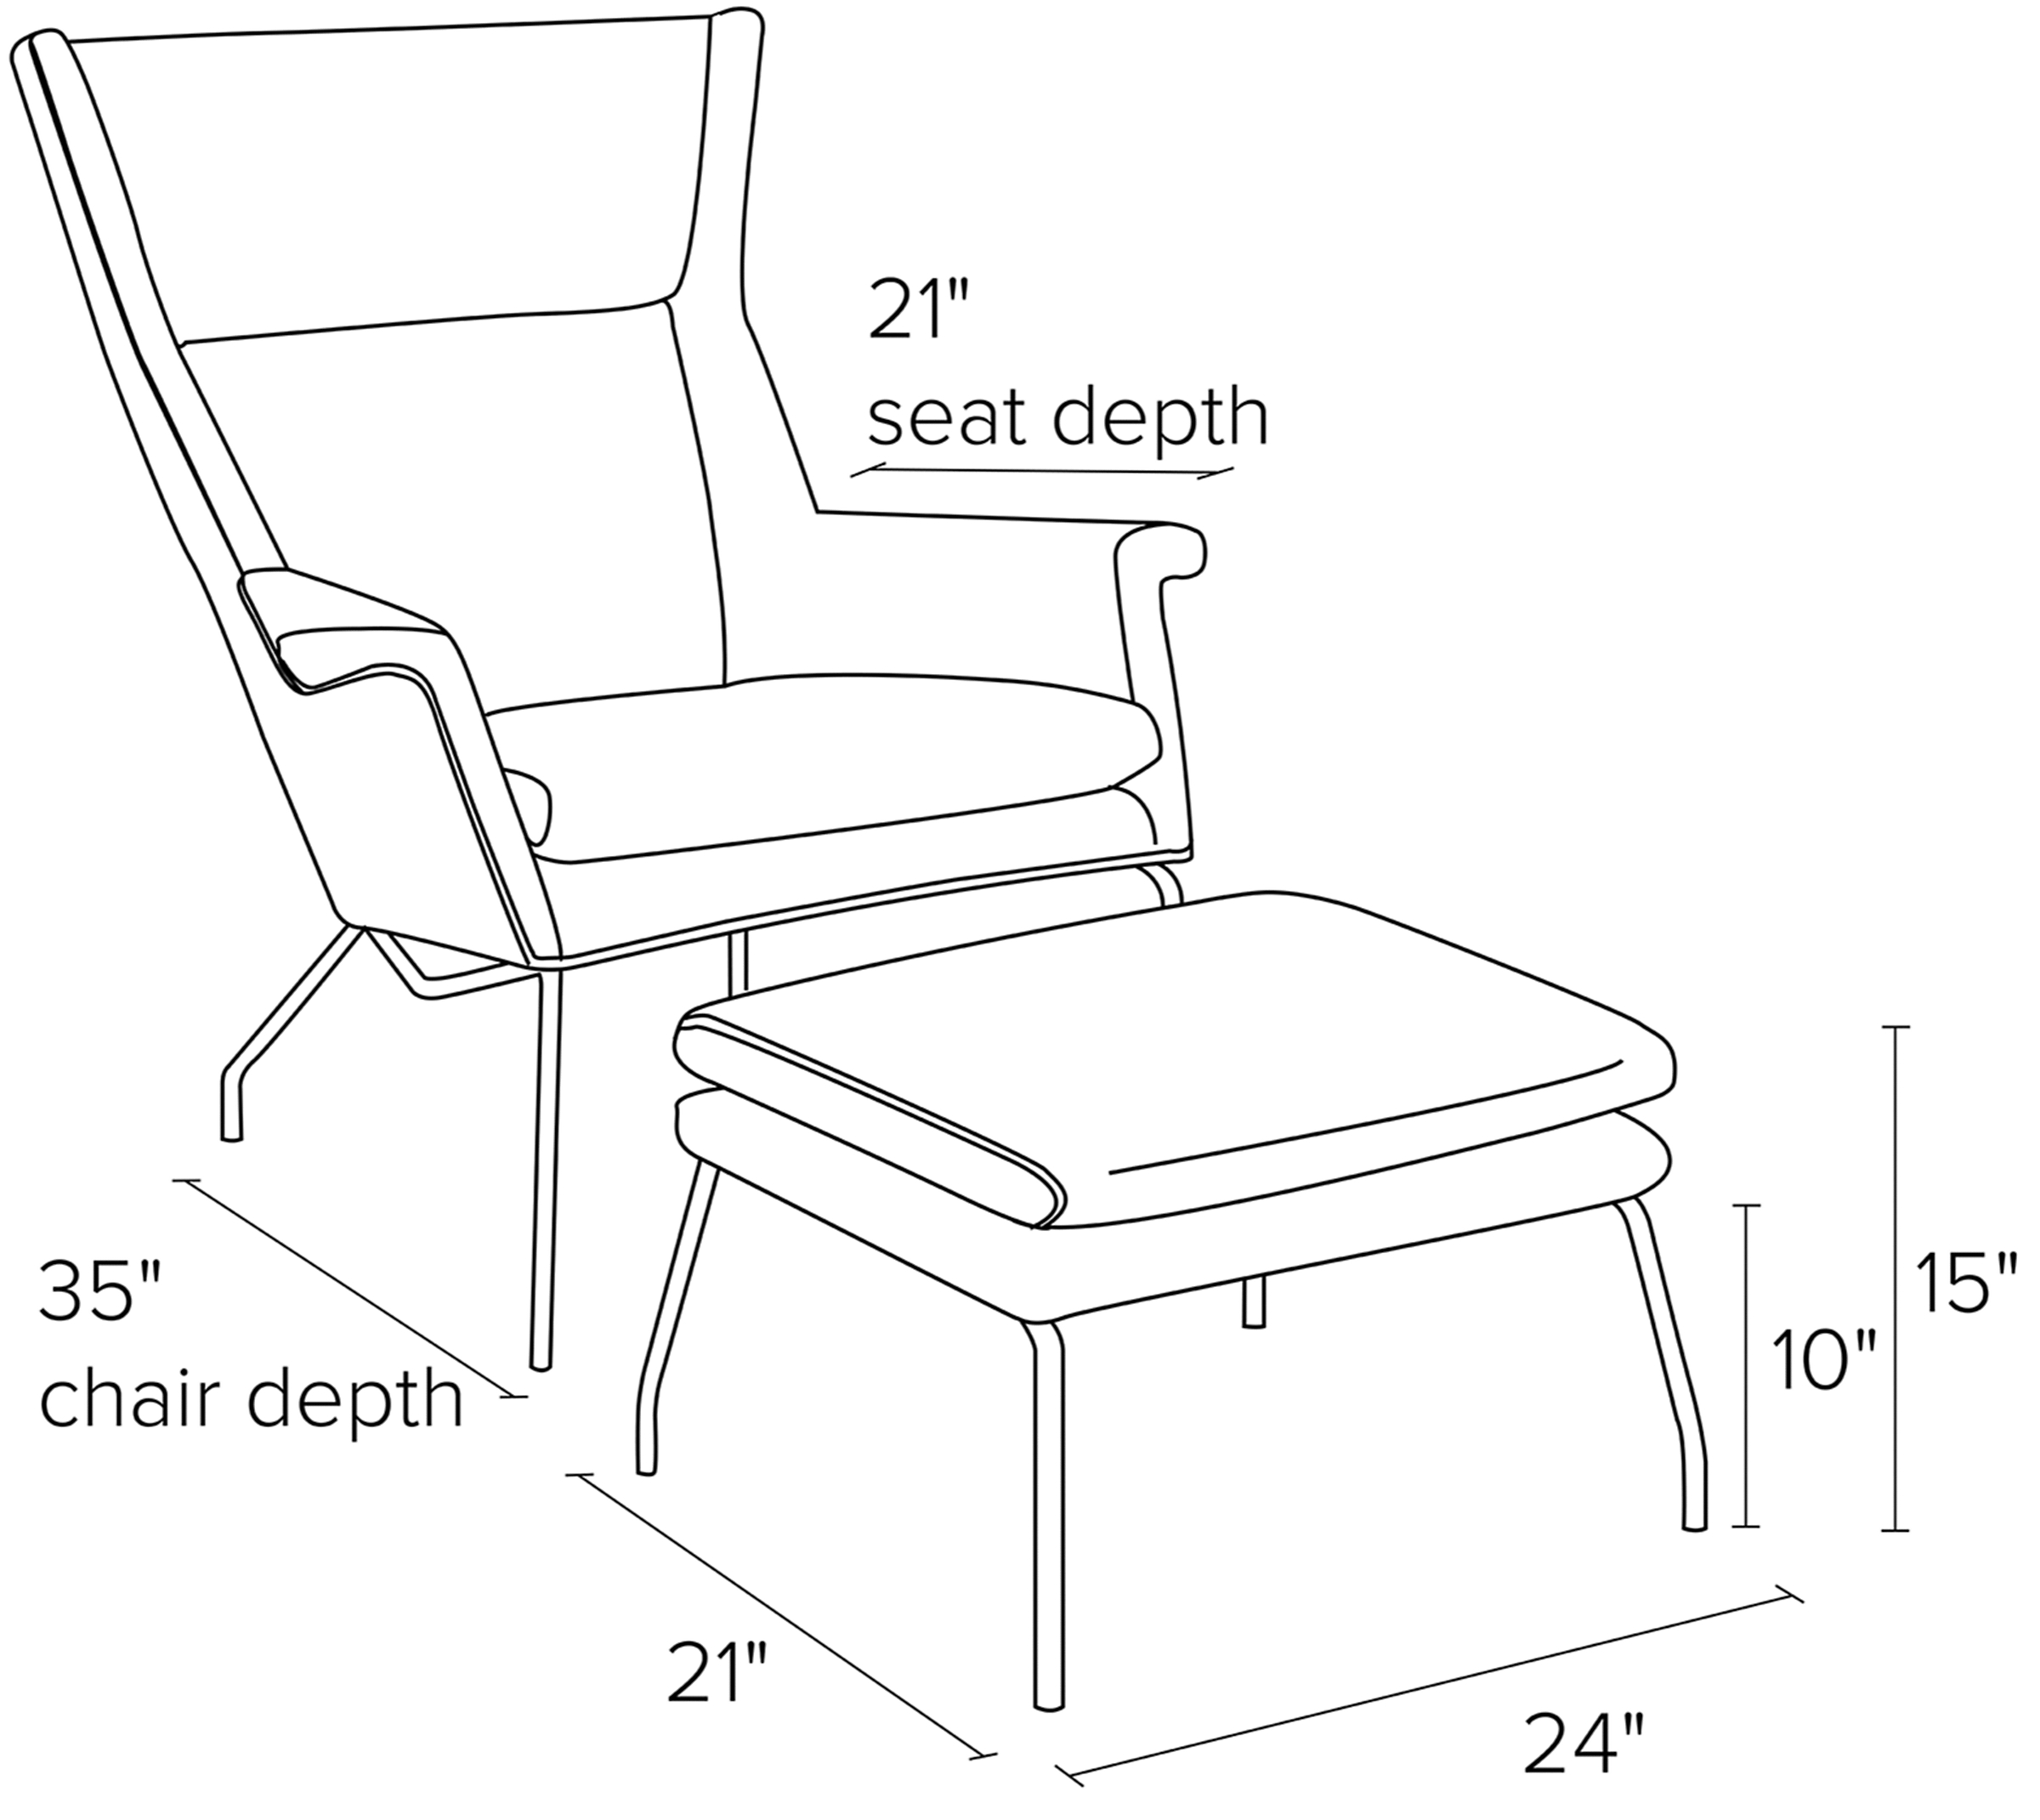 Side view dimension illustration of Aidan chair.